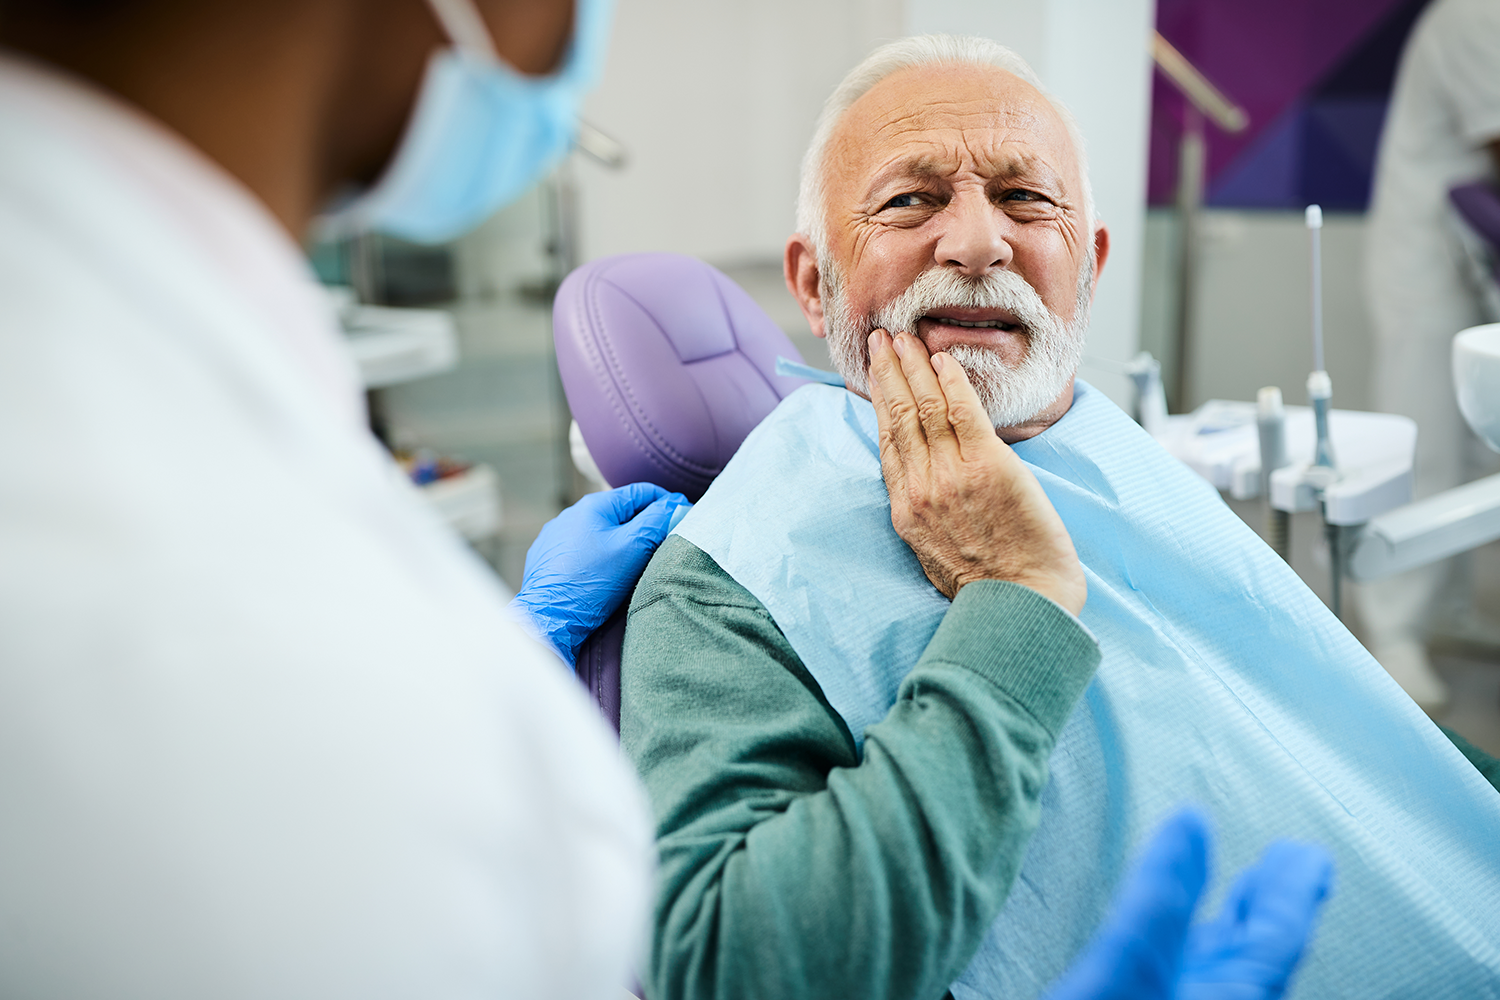 guy sitting in dental chair in pain holding hand up to his mouth